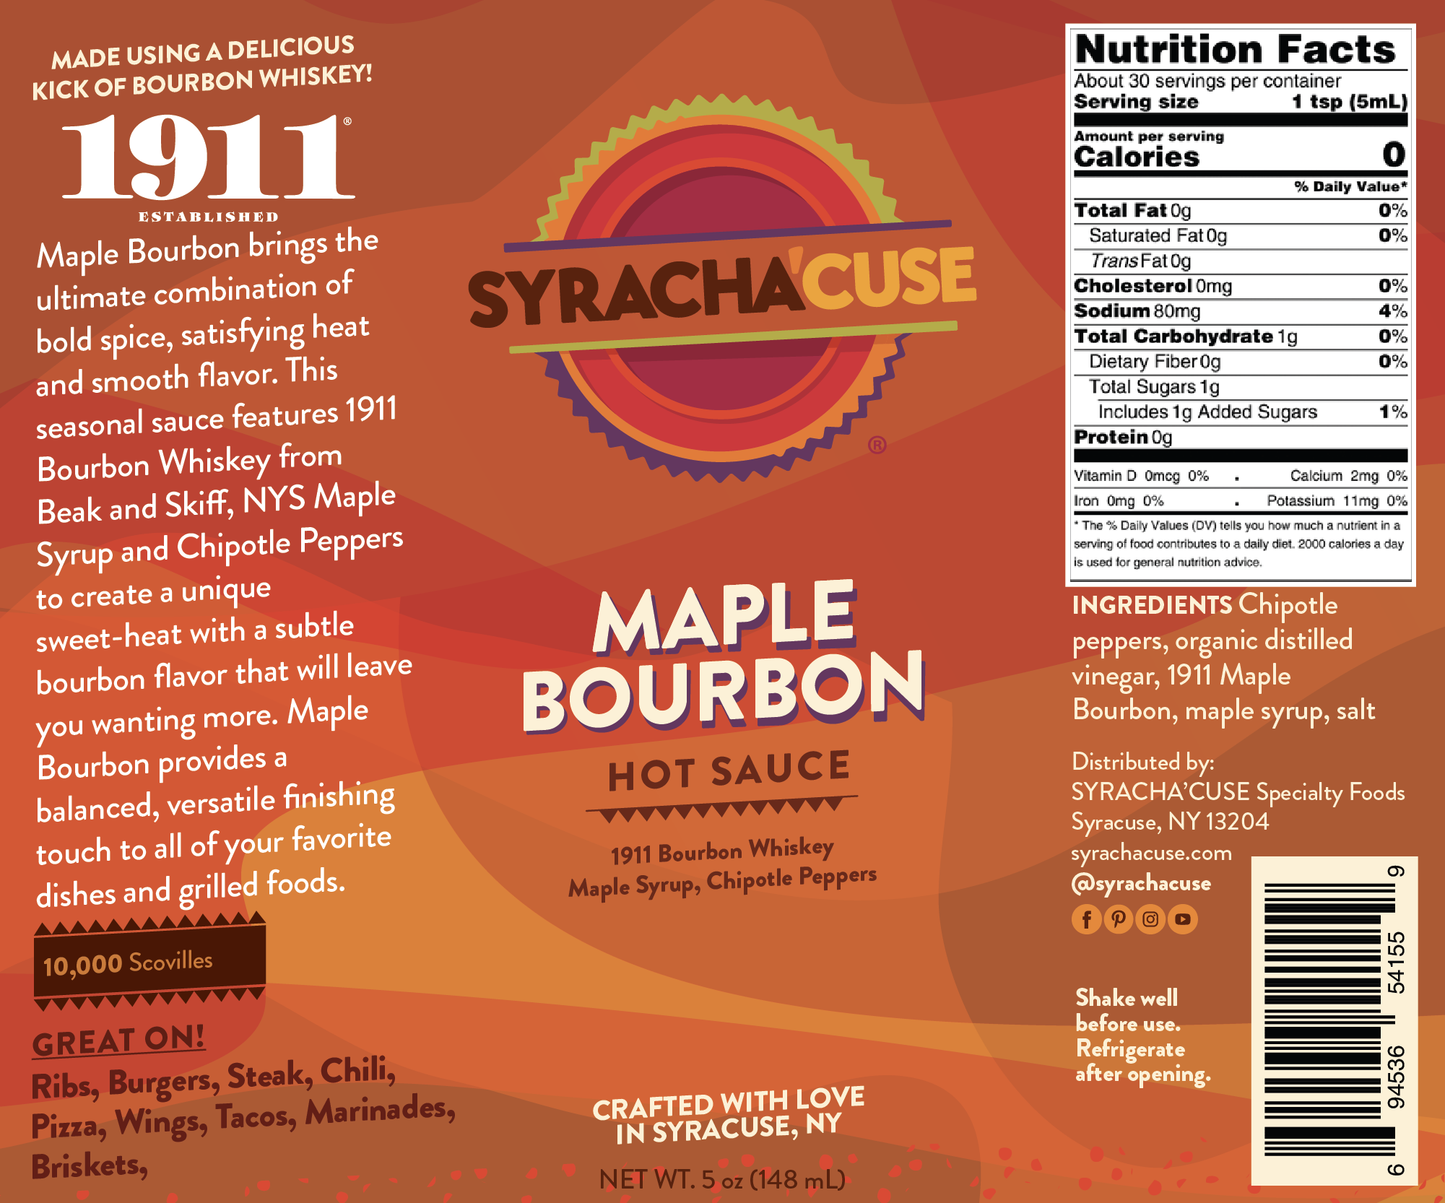 MAPLE BOURBON, Satisfying heat and smooth flavor this seasonal favorite is made with 1911 Bourbon Whiskey